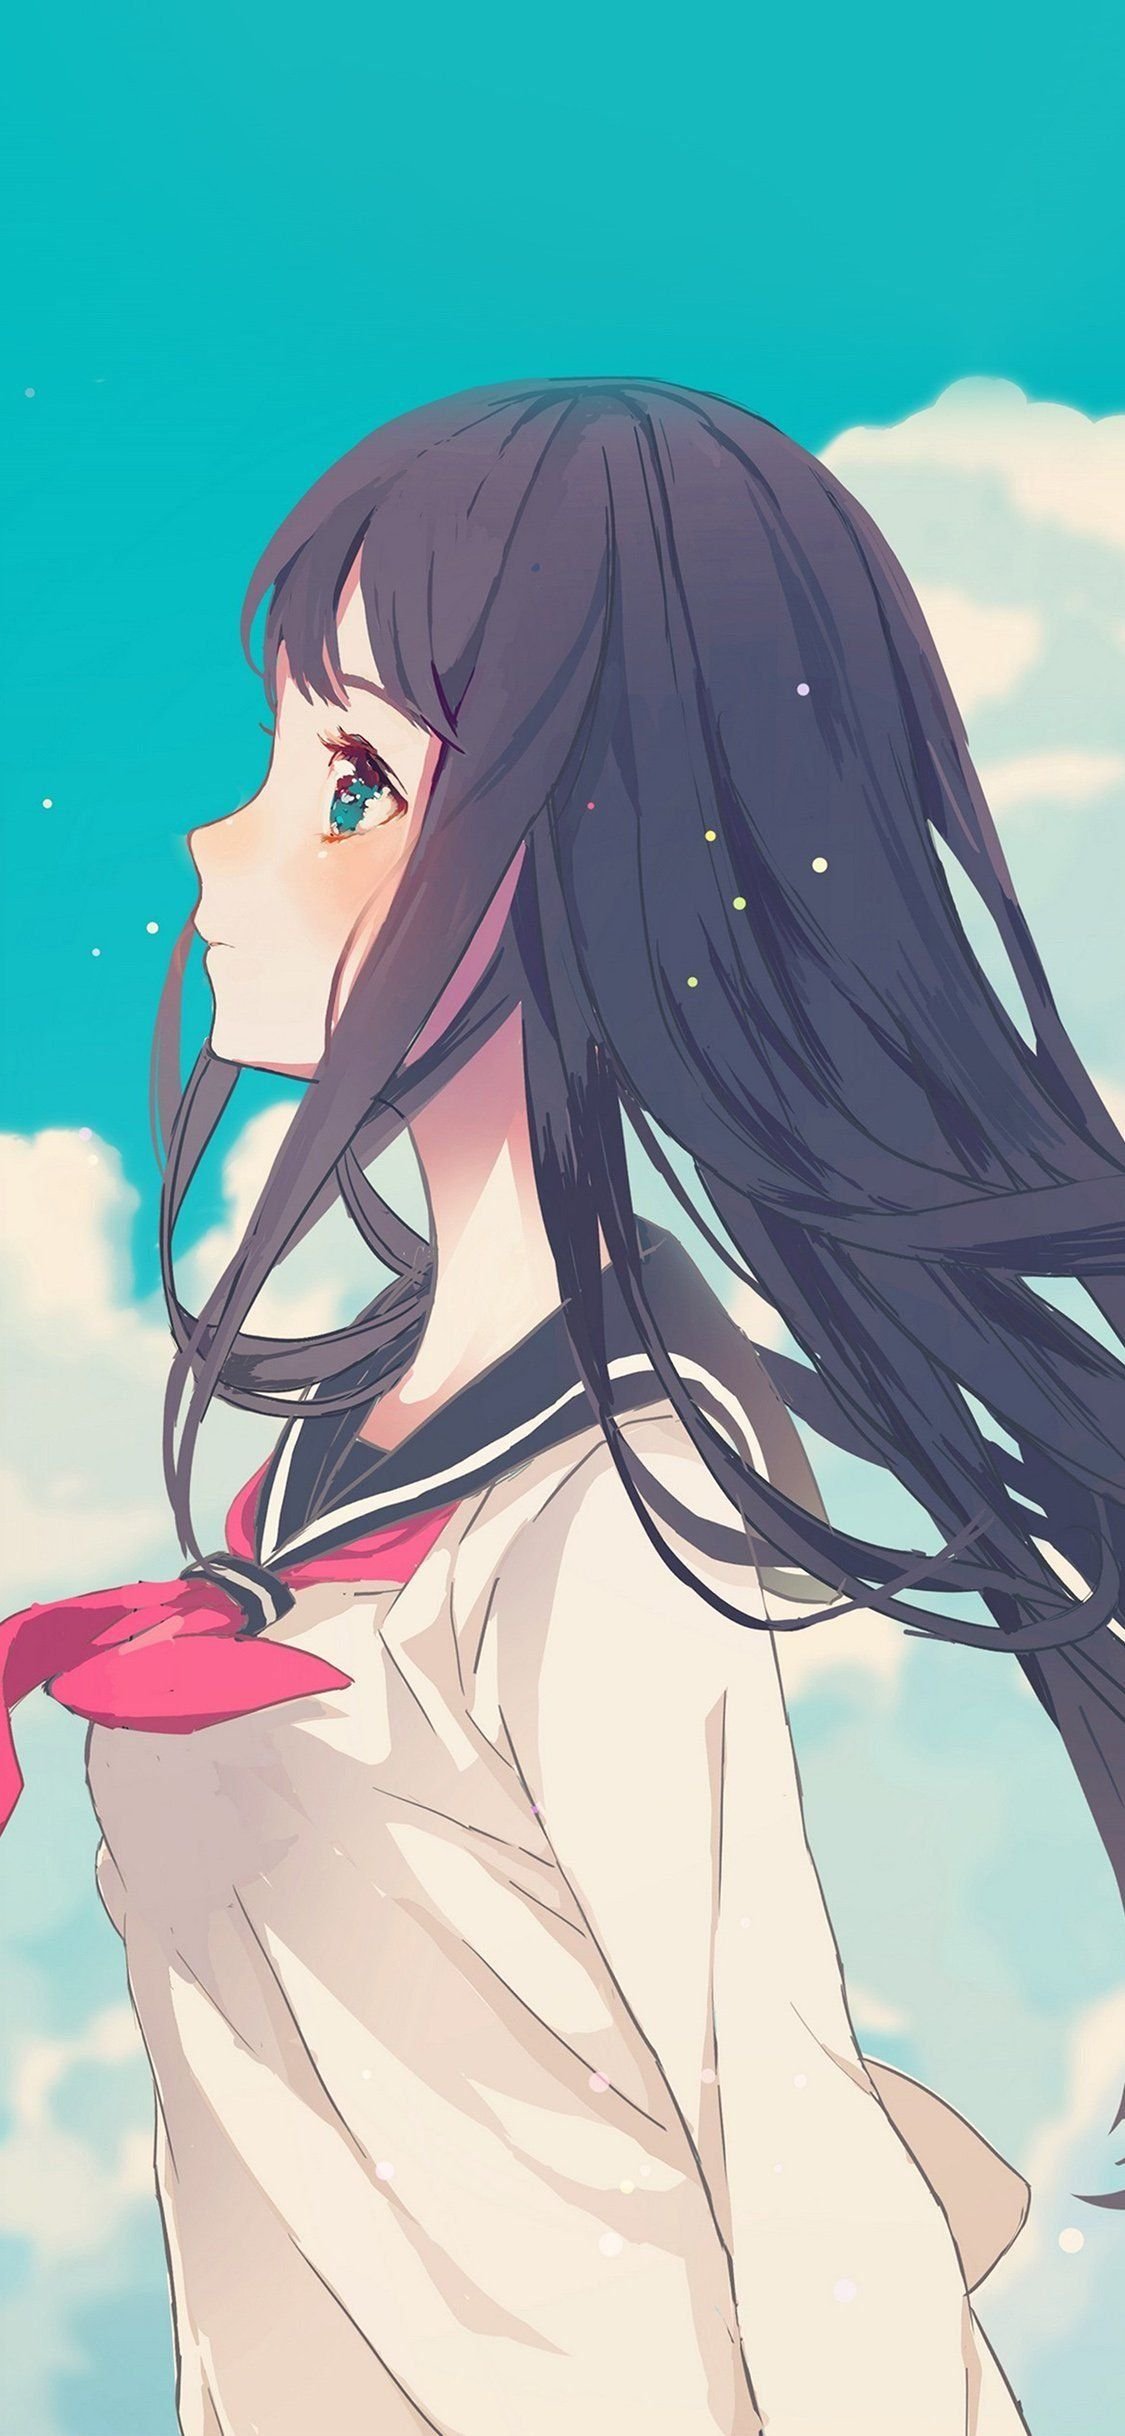 Anime girl aesthetic cute Wallpapers Download